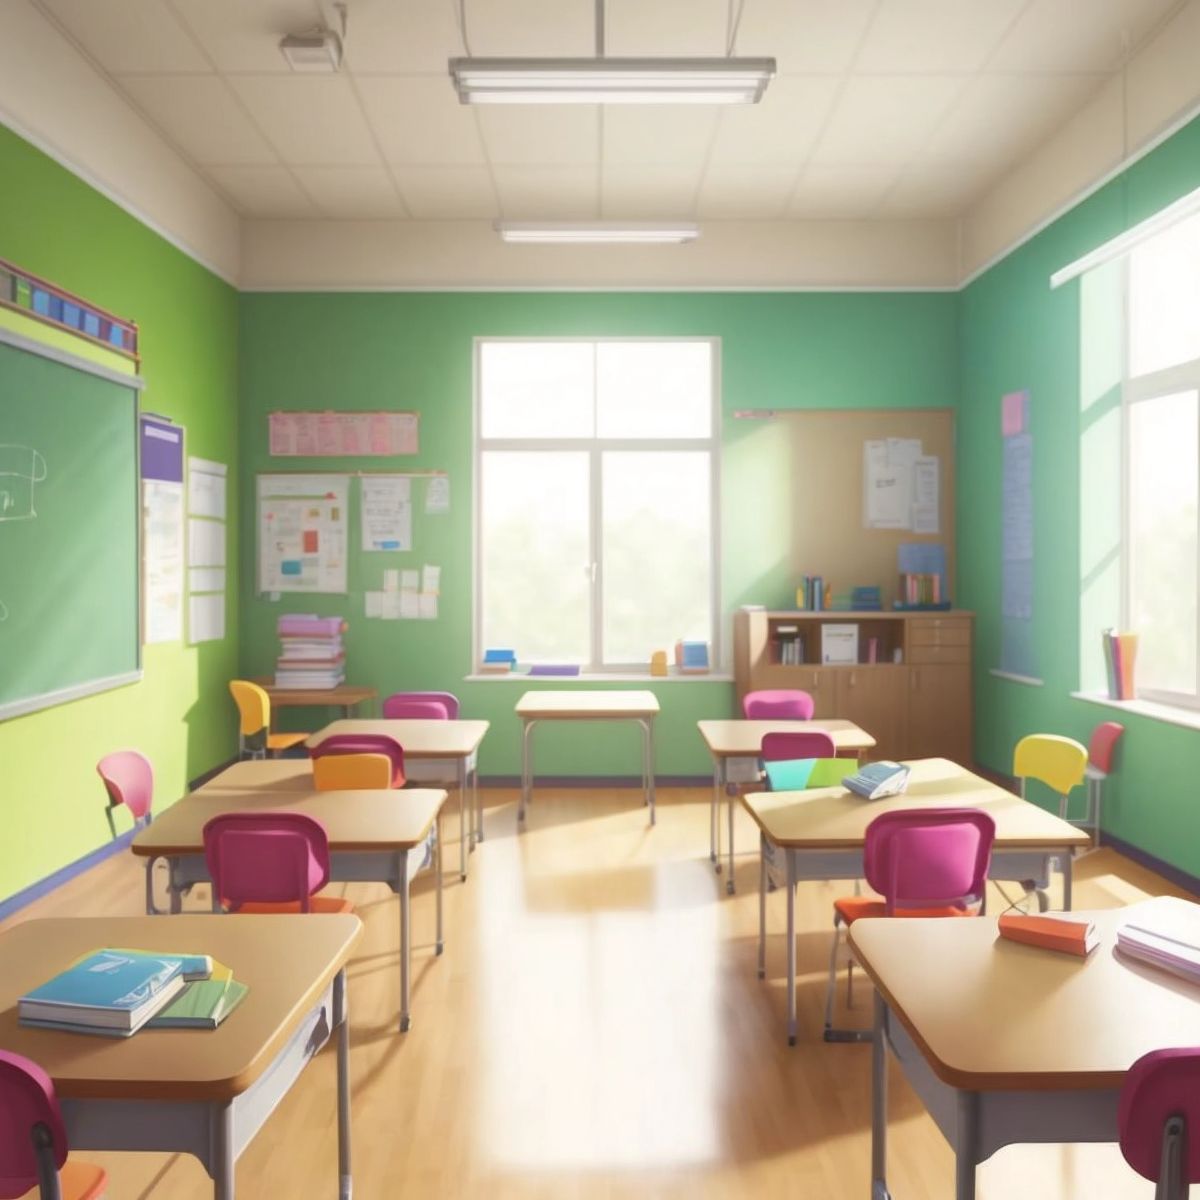 An empty classroom filled with colorful desks, chairs, and educational posters on the walls, ready for the students.